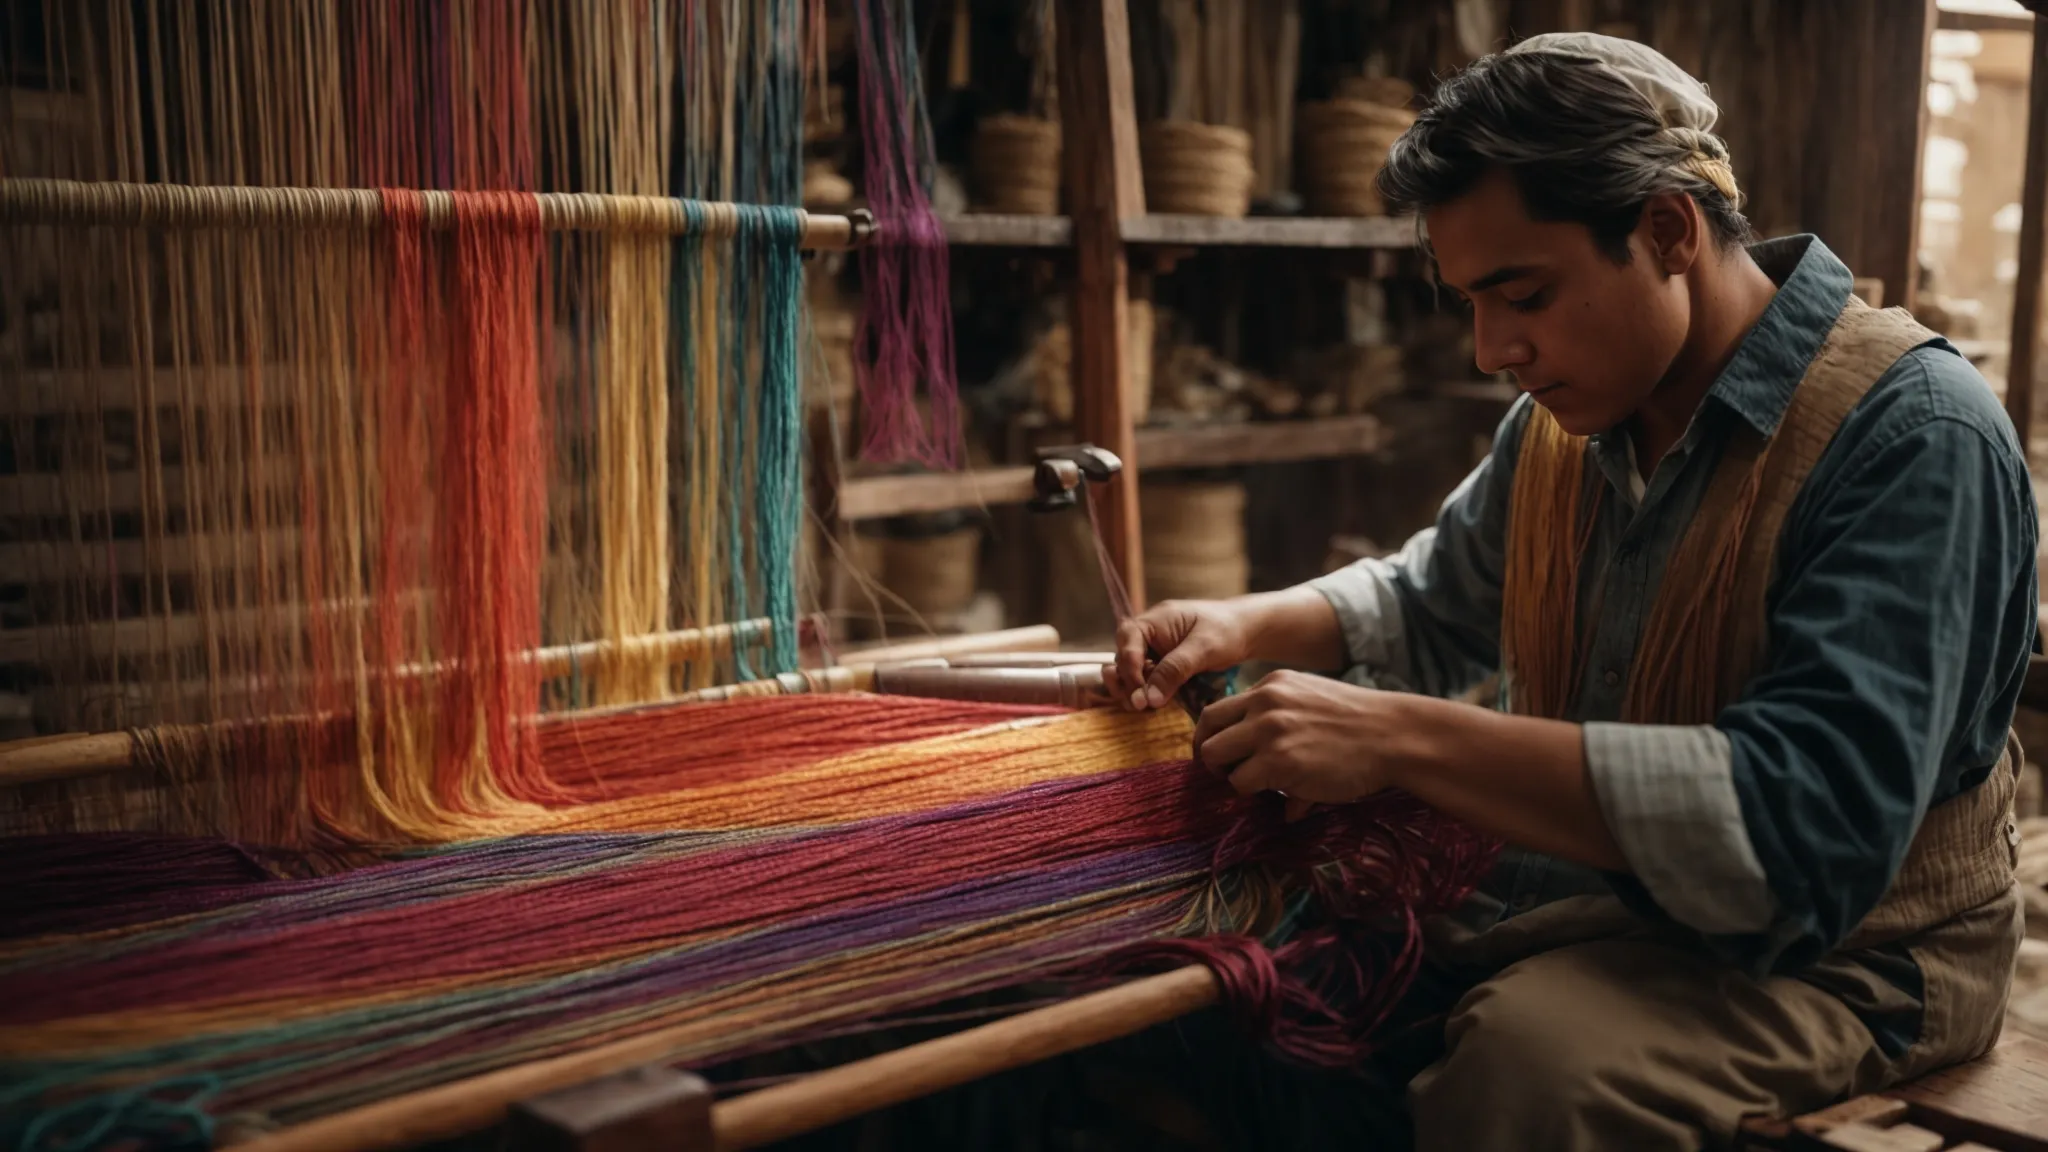 a craftsman weaving a colorful tapestry on an old wooden loom, surrounded by rolls of vibrant threads.